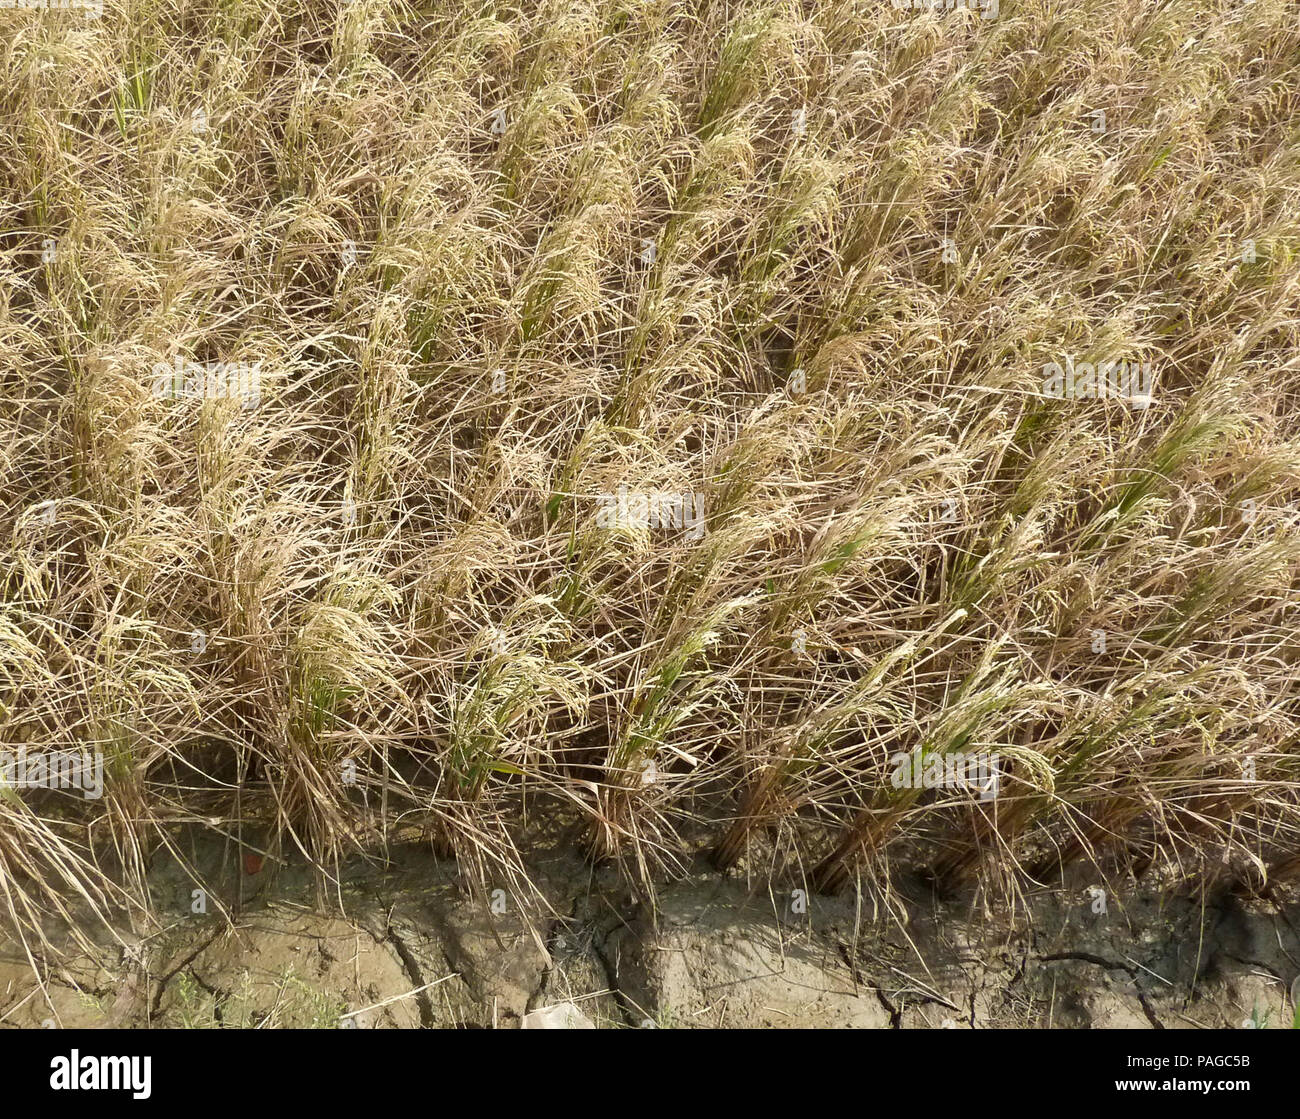 A rice field in Ben Tre province. Stock Photo